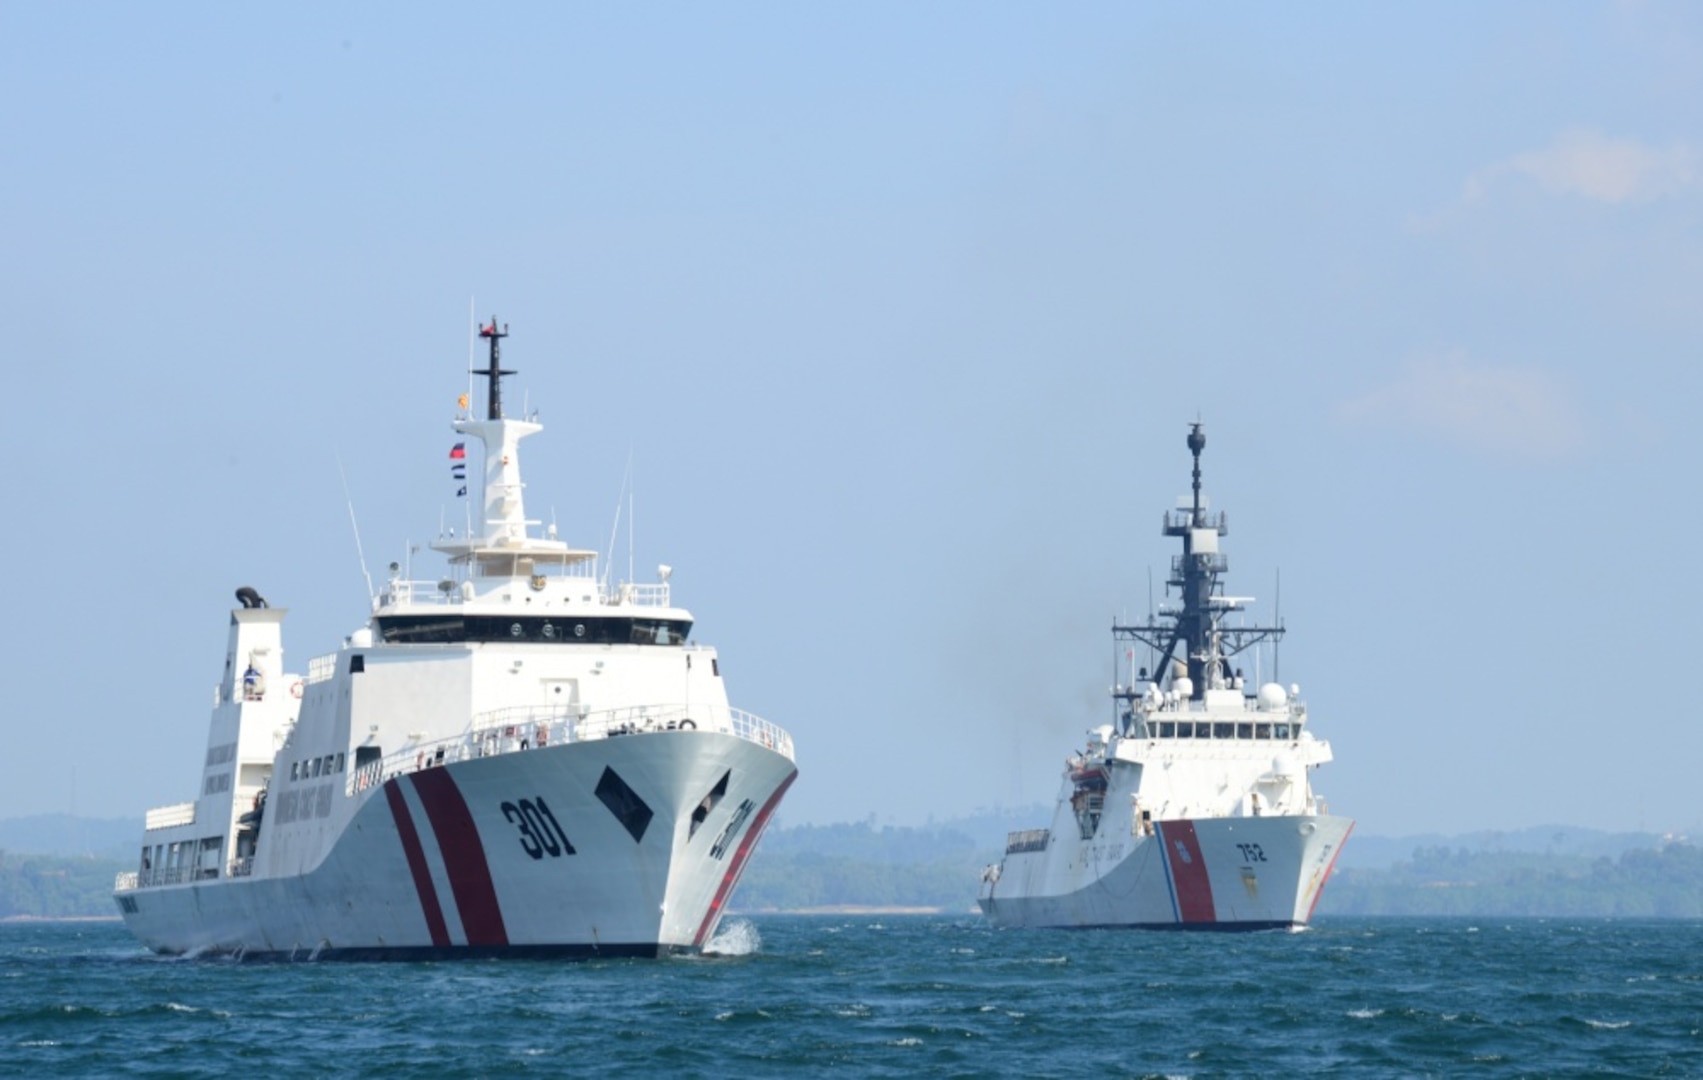 Coast Guard Cutter Stratton Arrives in Malaysia following Training and Engagements in Indonesia